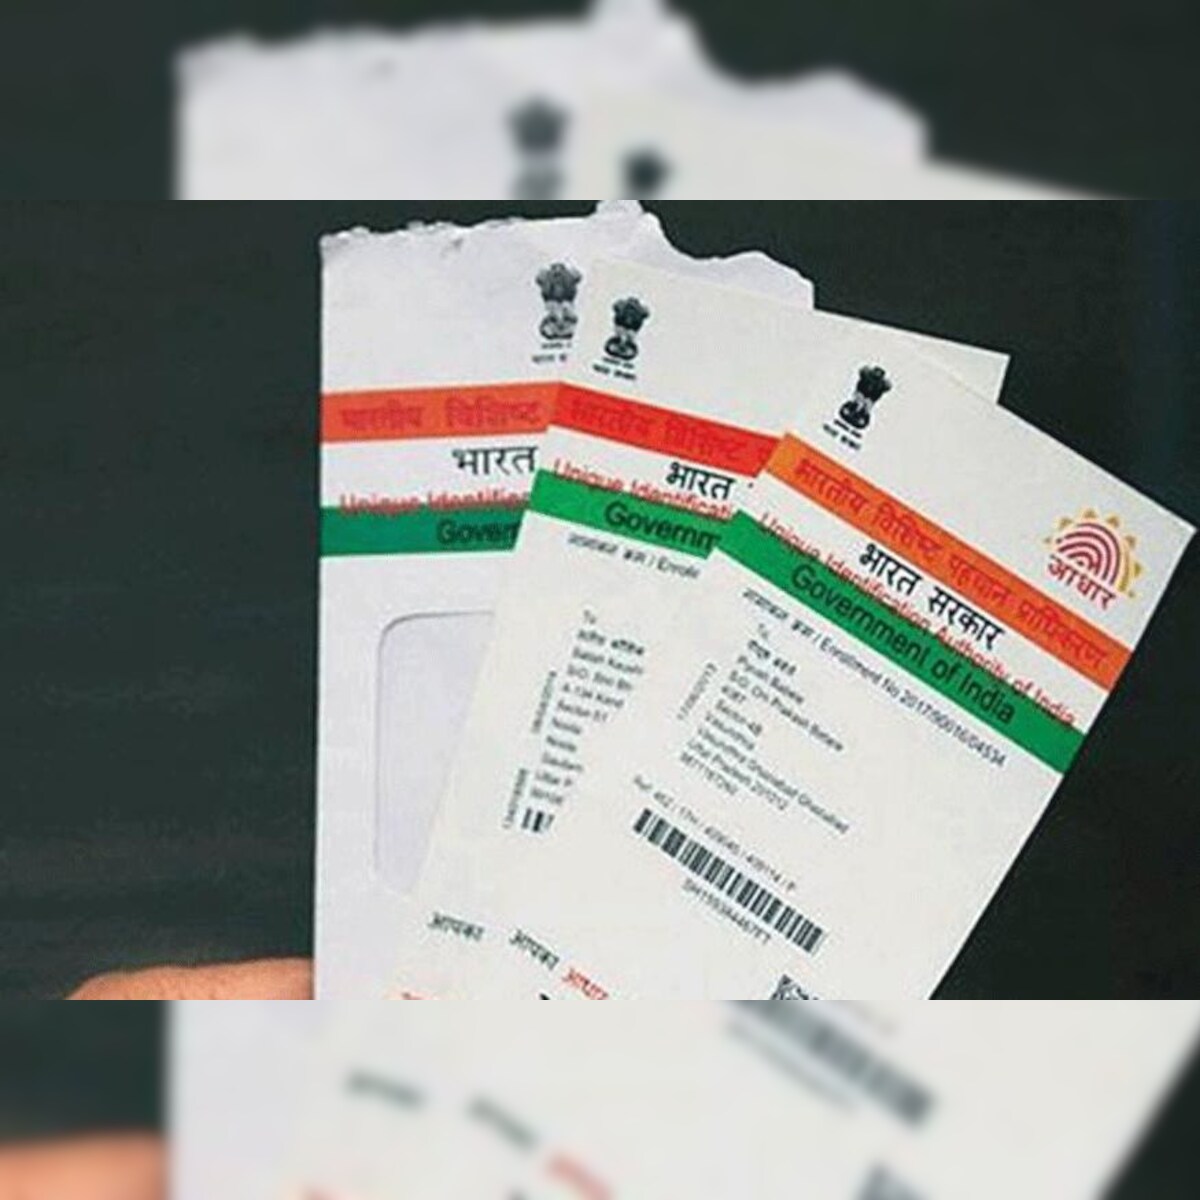 To Protect dhaar Privacy Uidai Launches 16 Digit Virtual Id